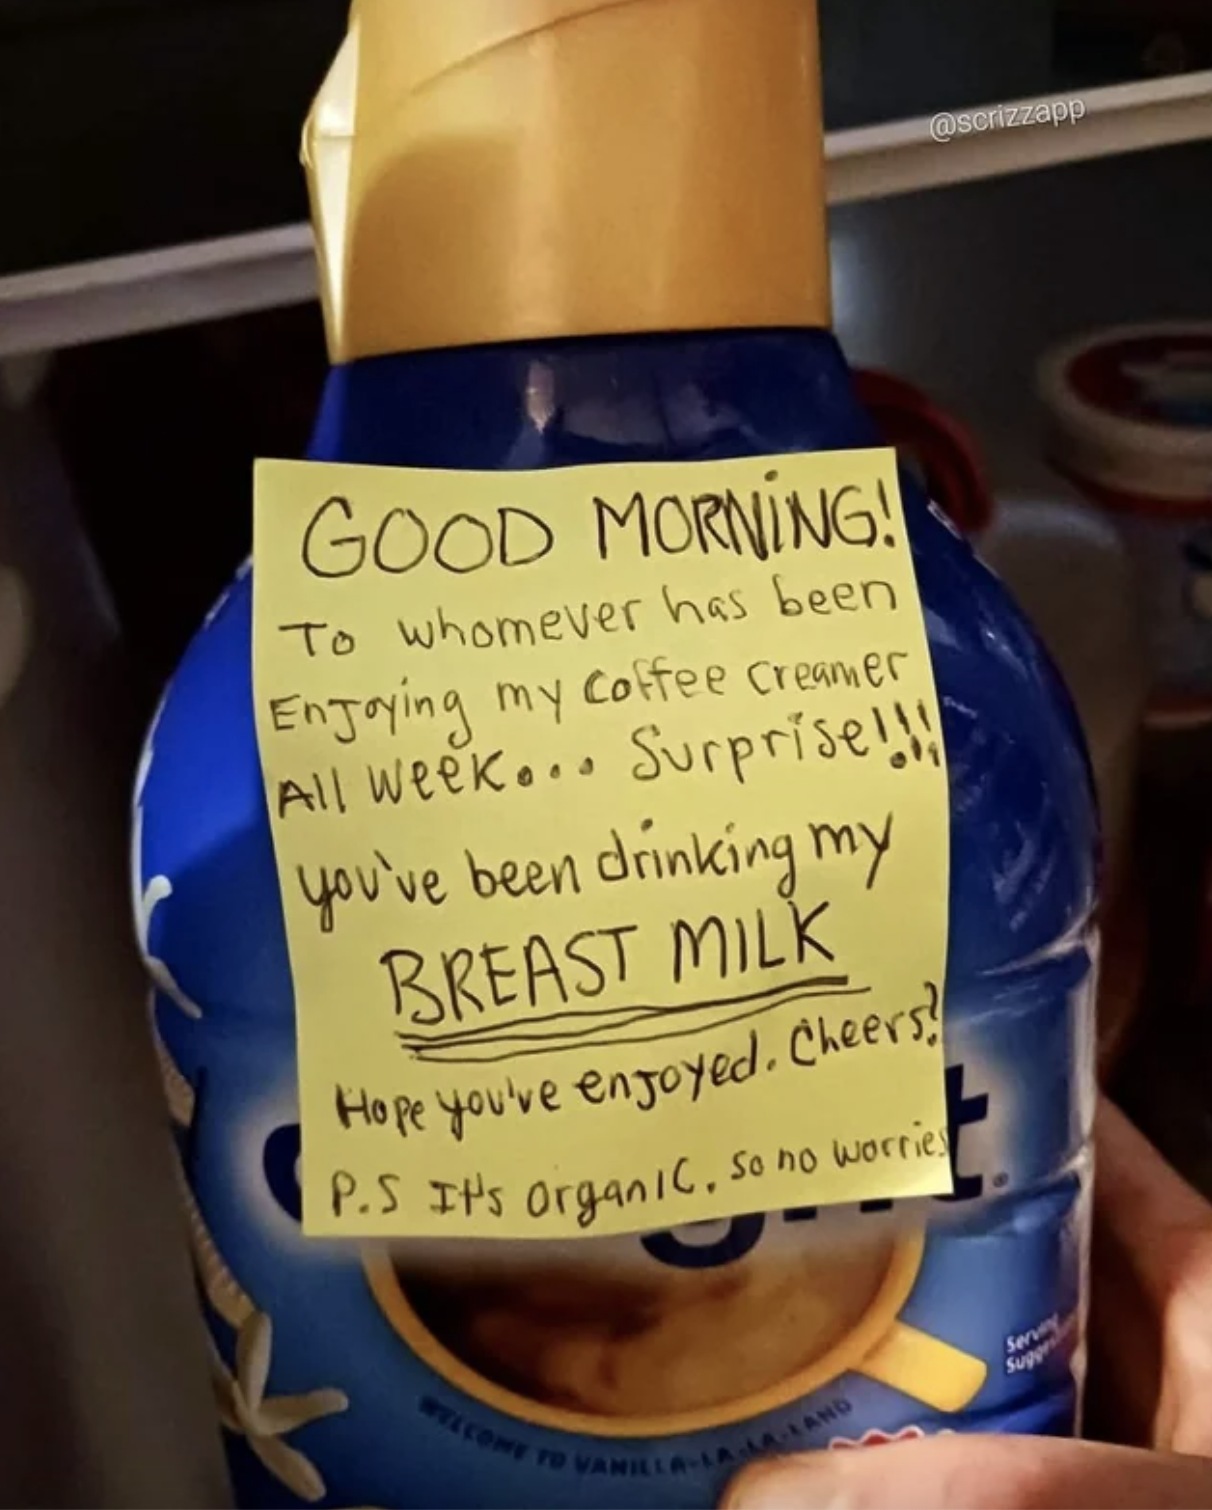 A sticky noted on a bottle of coffee creamer that says, &quot;good morning to whomever has been enjoying my coffee creamer all week, surprise, you&#x27;ve been drinking my breast milk&quot;